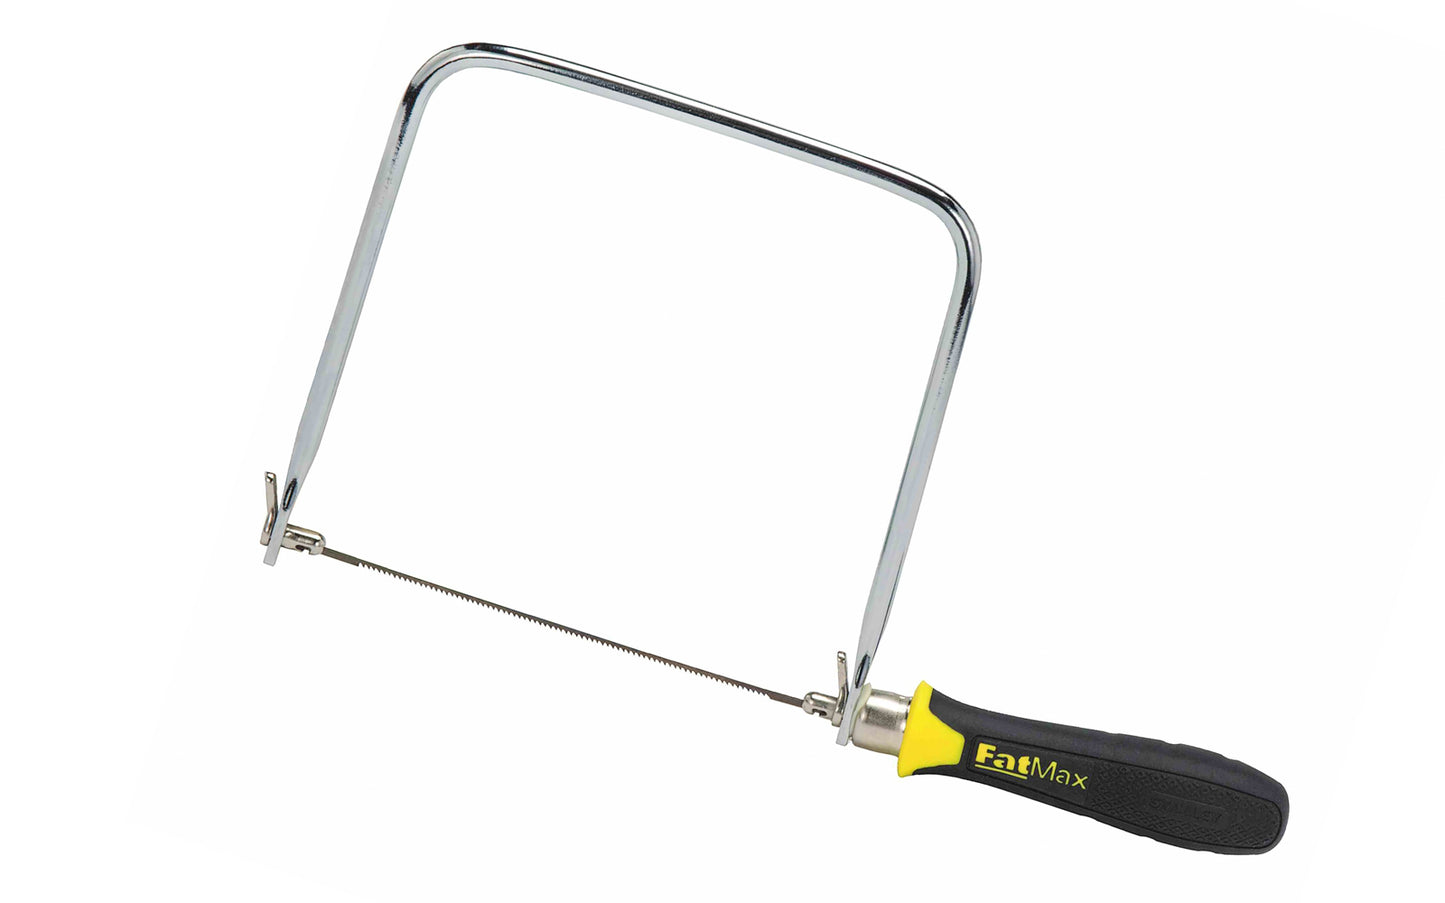 Stanley 6-3/4" FatMax Coping Saw With Four Blades ~ 15-106A - Blades can be turned 360º at 45º increments - High-grade carbon hardened & tempered blade provides